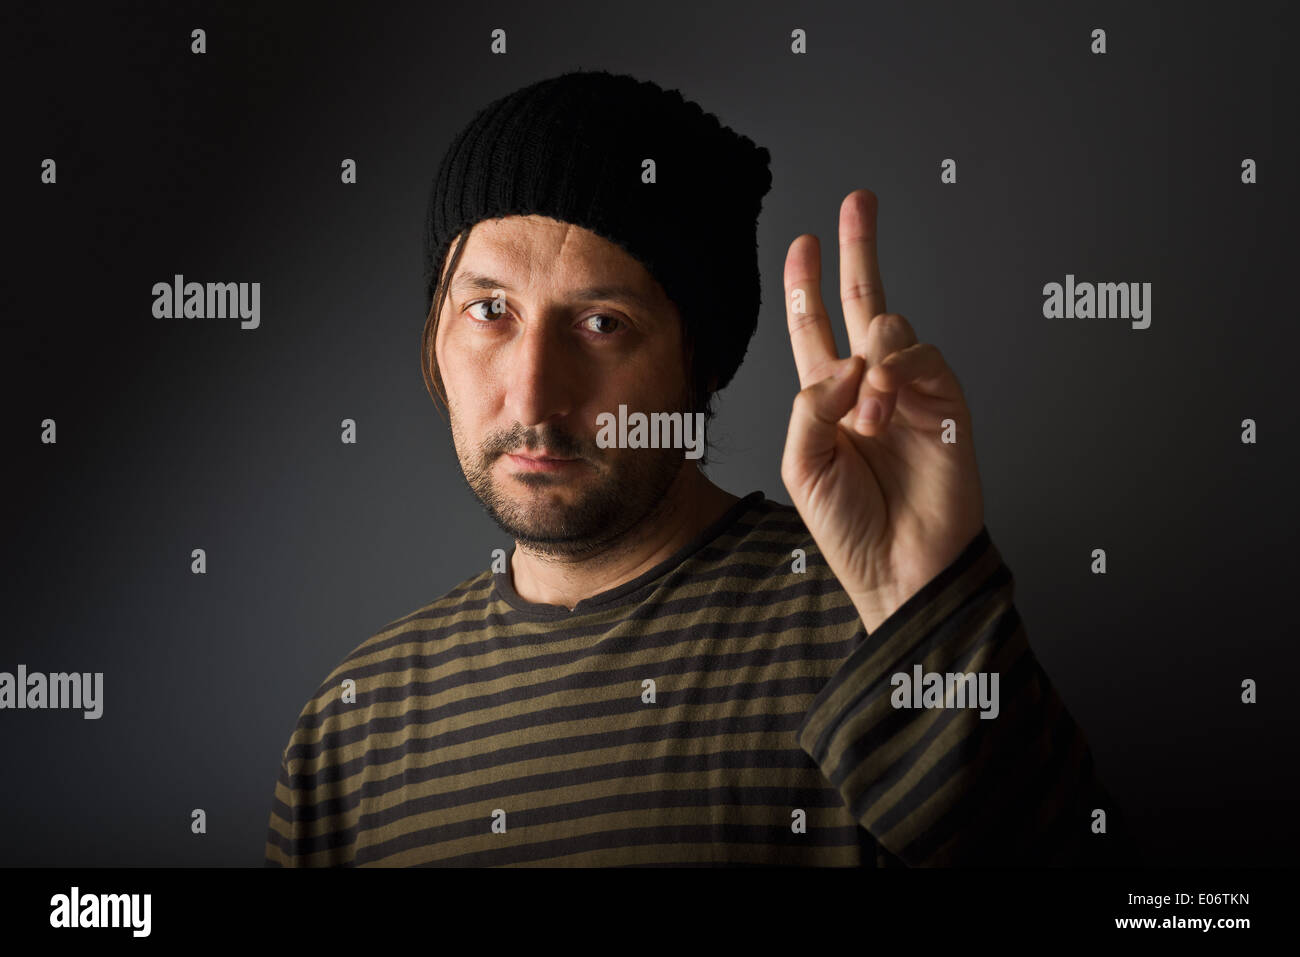 Casual caucasian man giving two fingers as peace or victory symbol Stock Photo